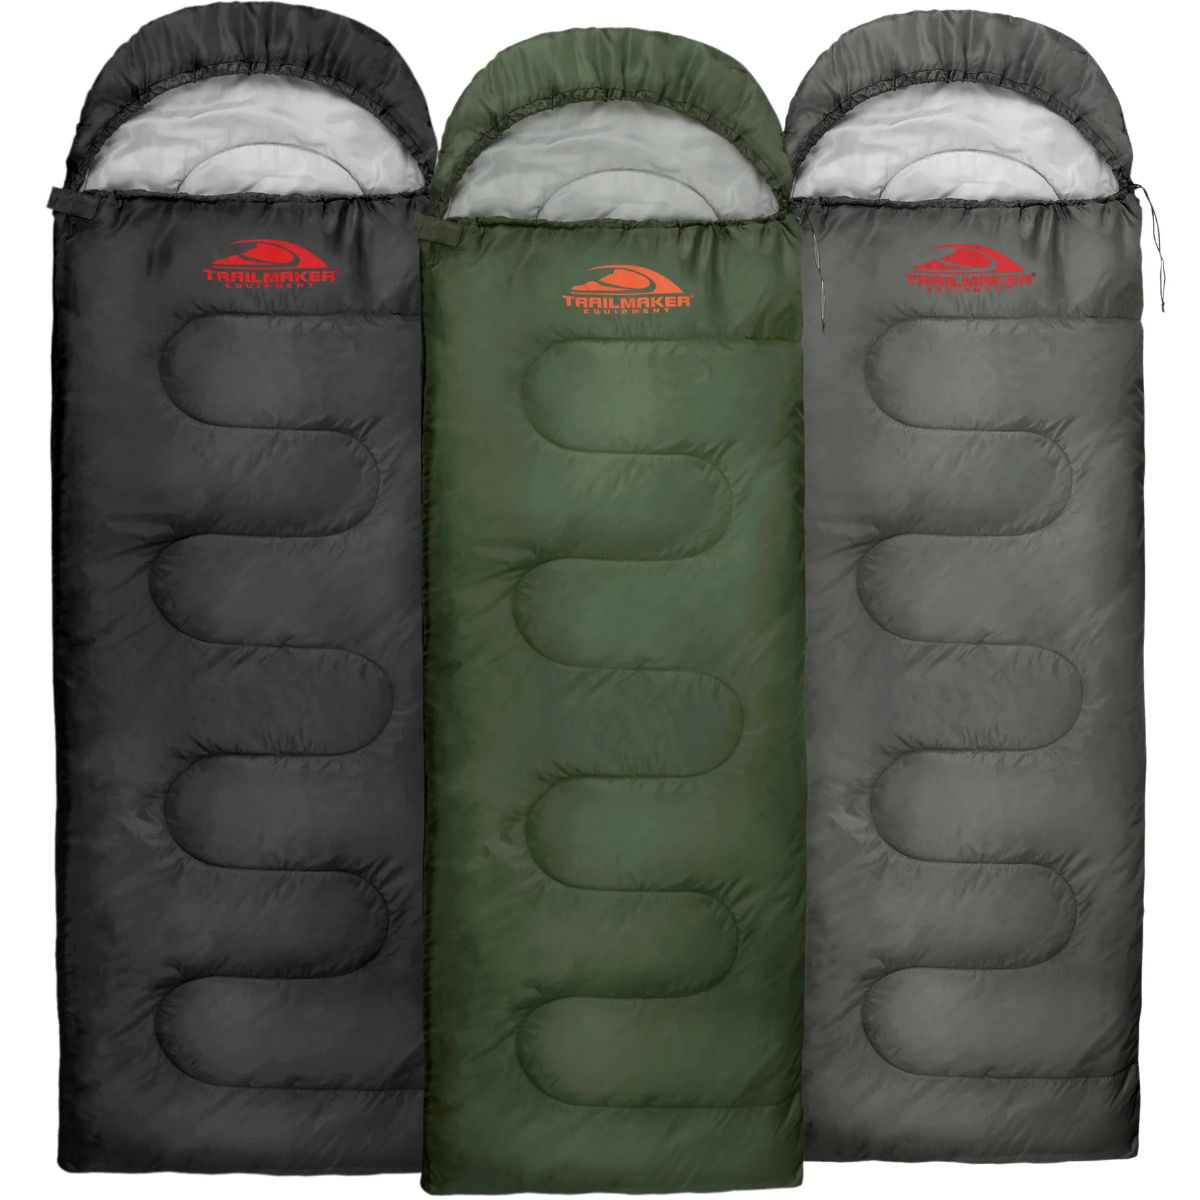 10 Wholesale Waterproof Cold Weather Sleeping Bags - 30f Assorted Colors